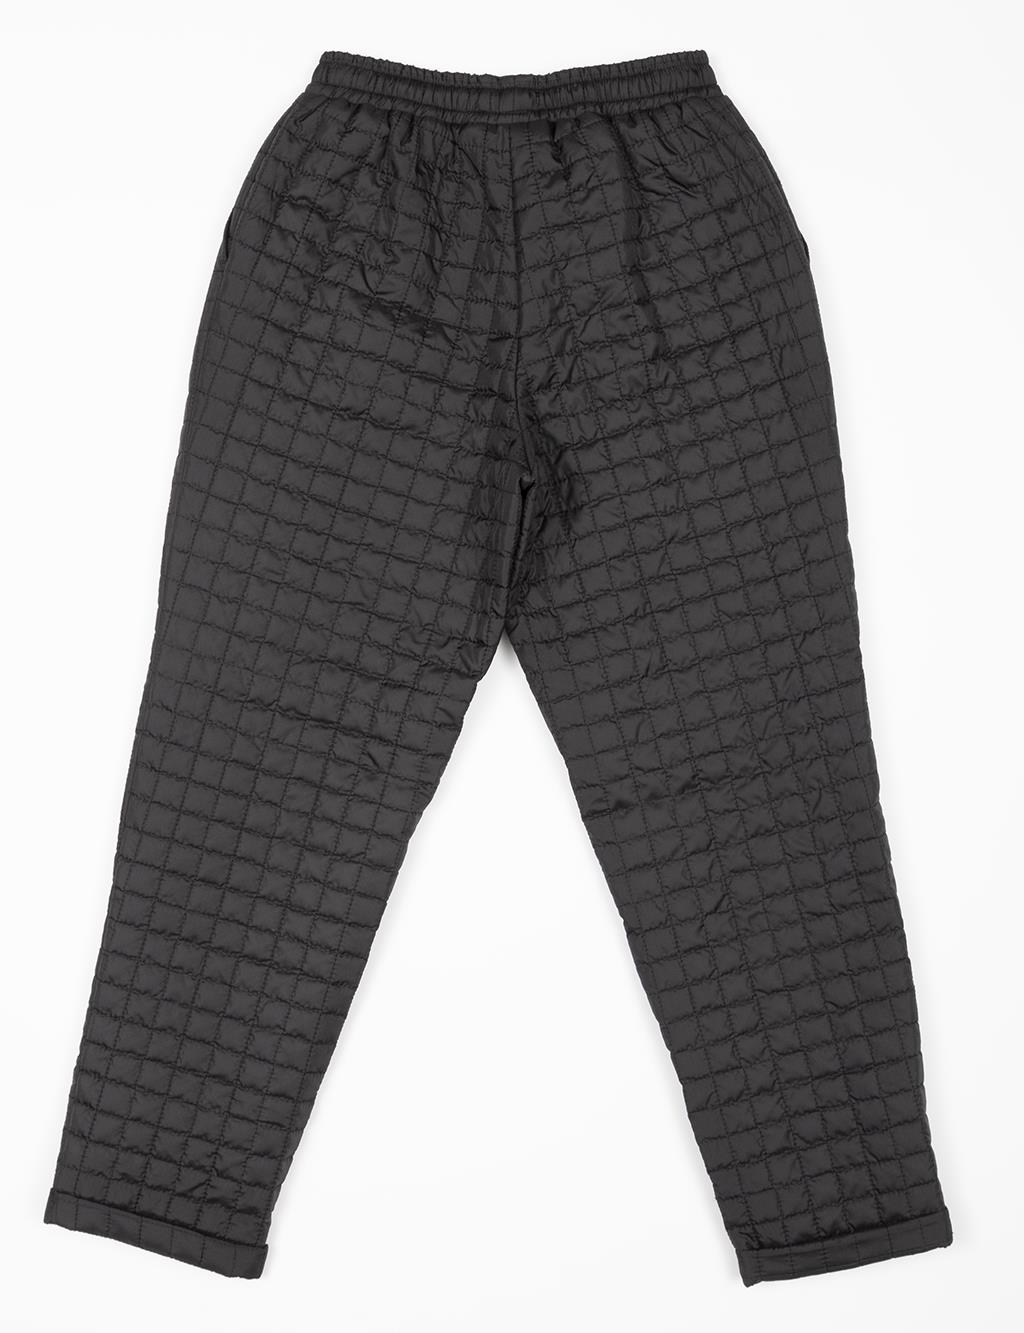 Quilted Patterned Elastic Waist Trousers Black